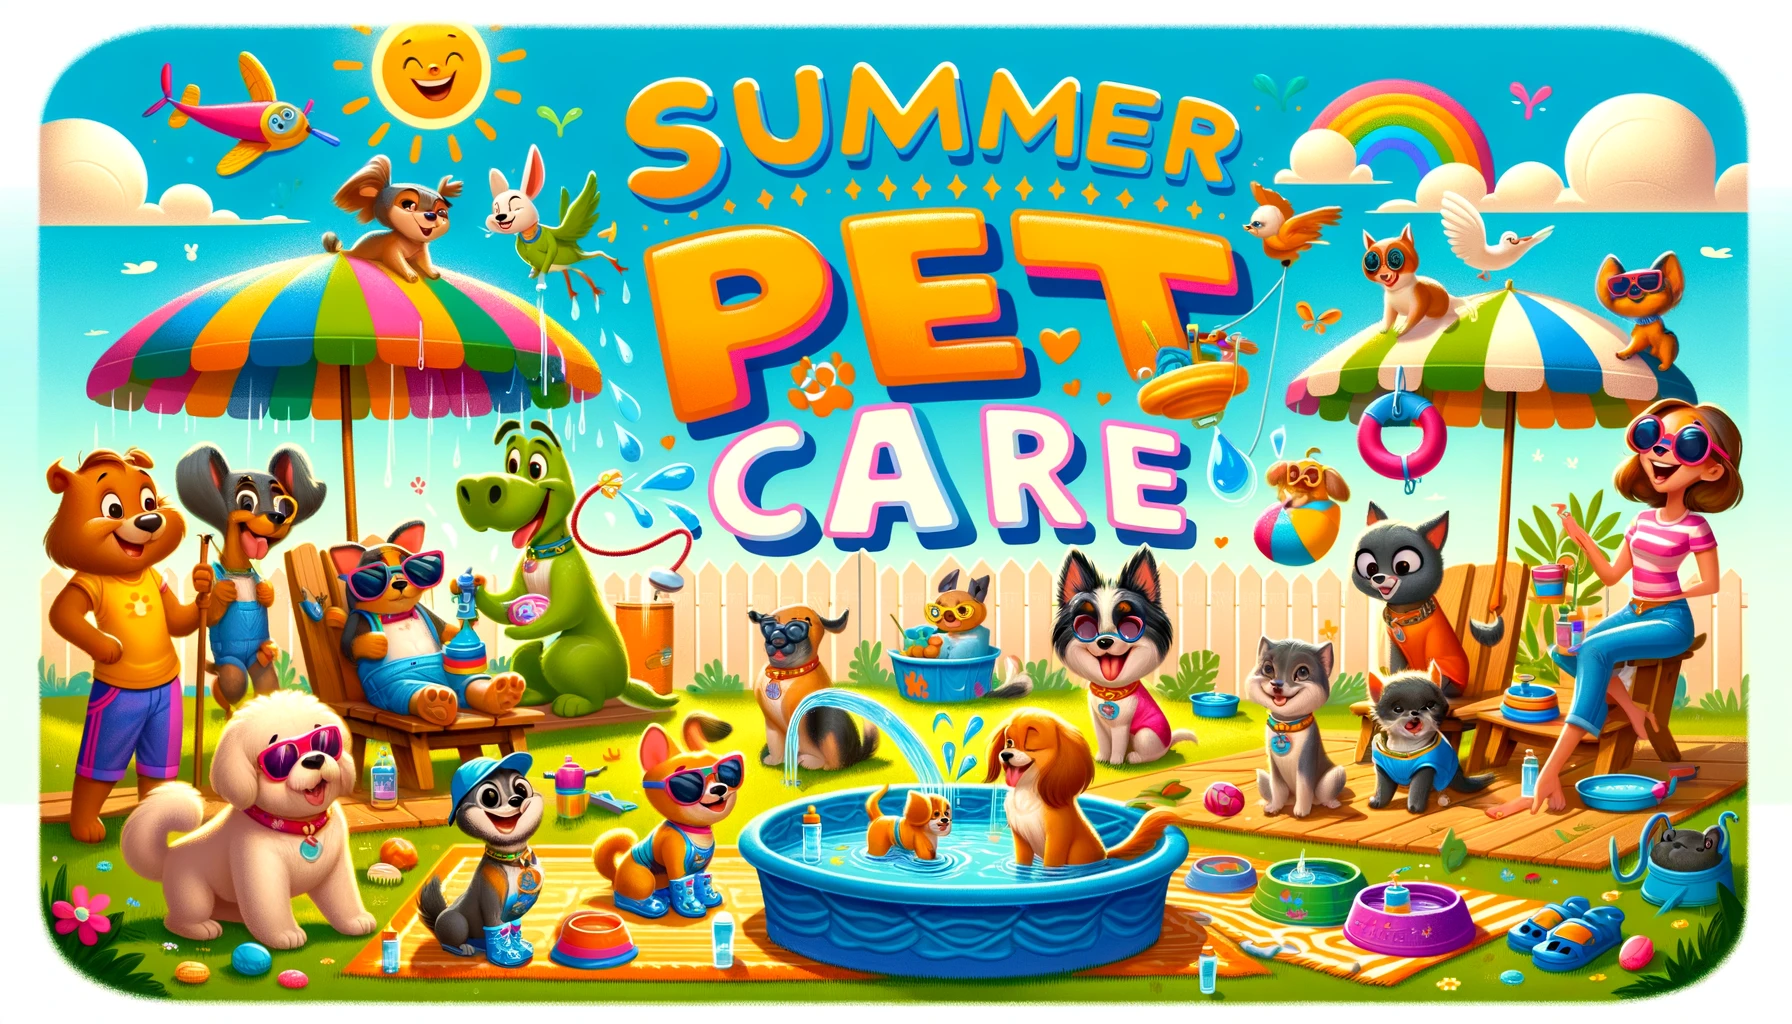 Summer Pet Care: Keeping Your Furry Friends Safe and Happy in the Heat